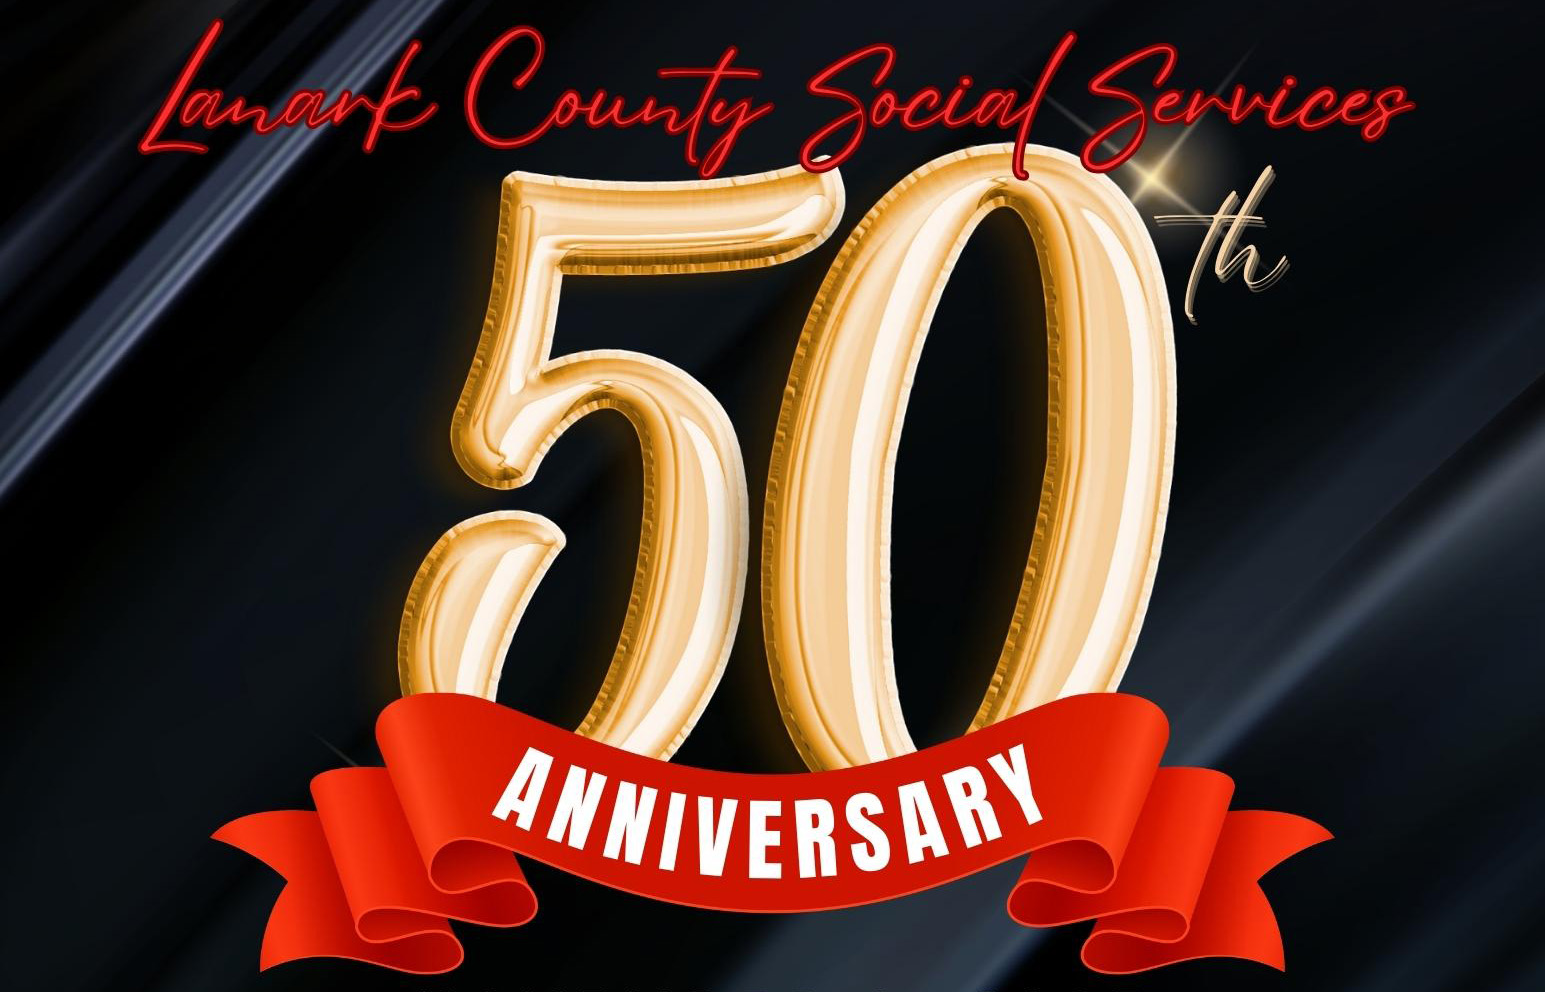 Graphic reading 'Lanark County Social Services 50th anniversary' in red, gold and white text